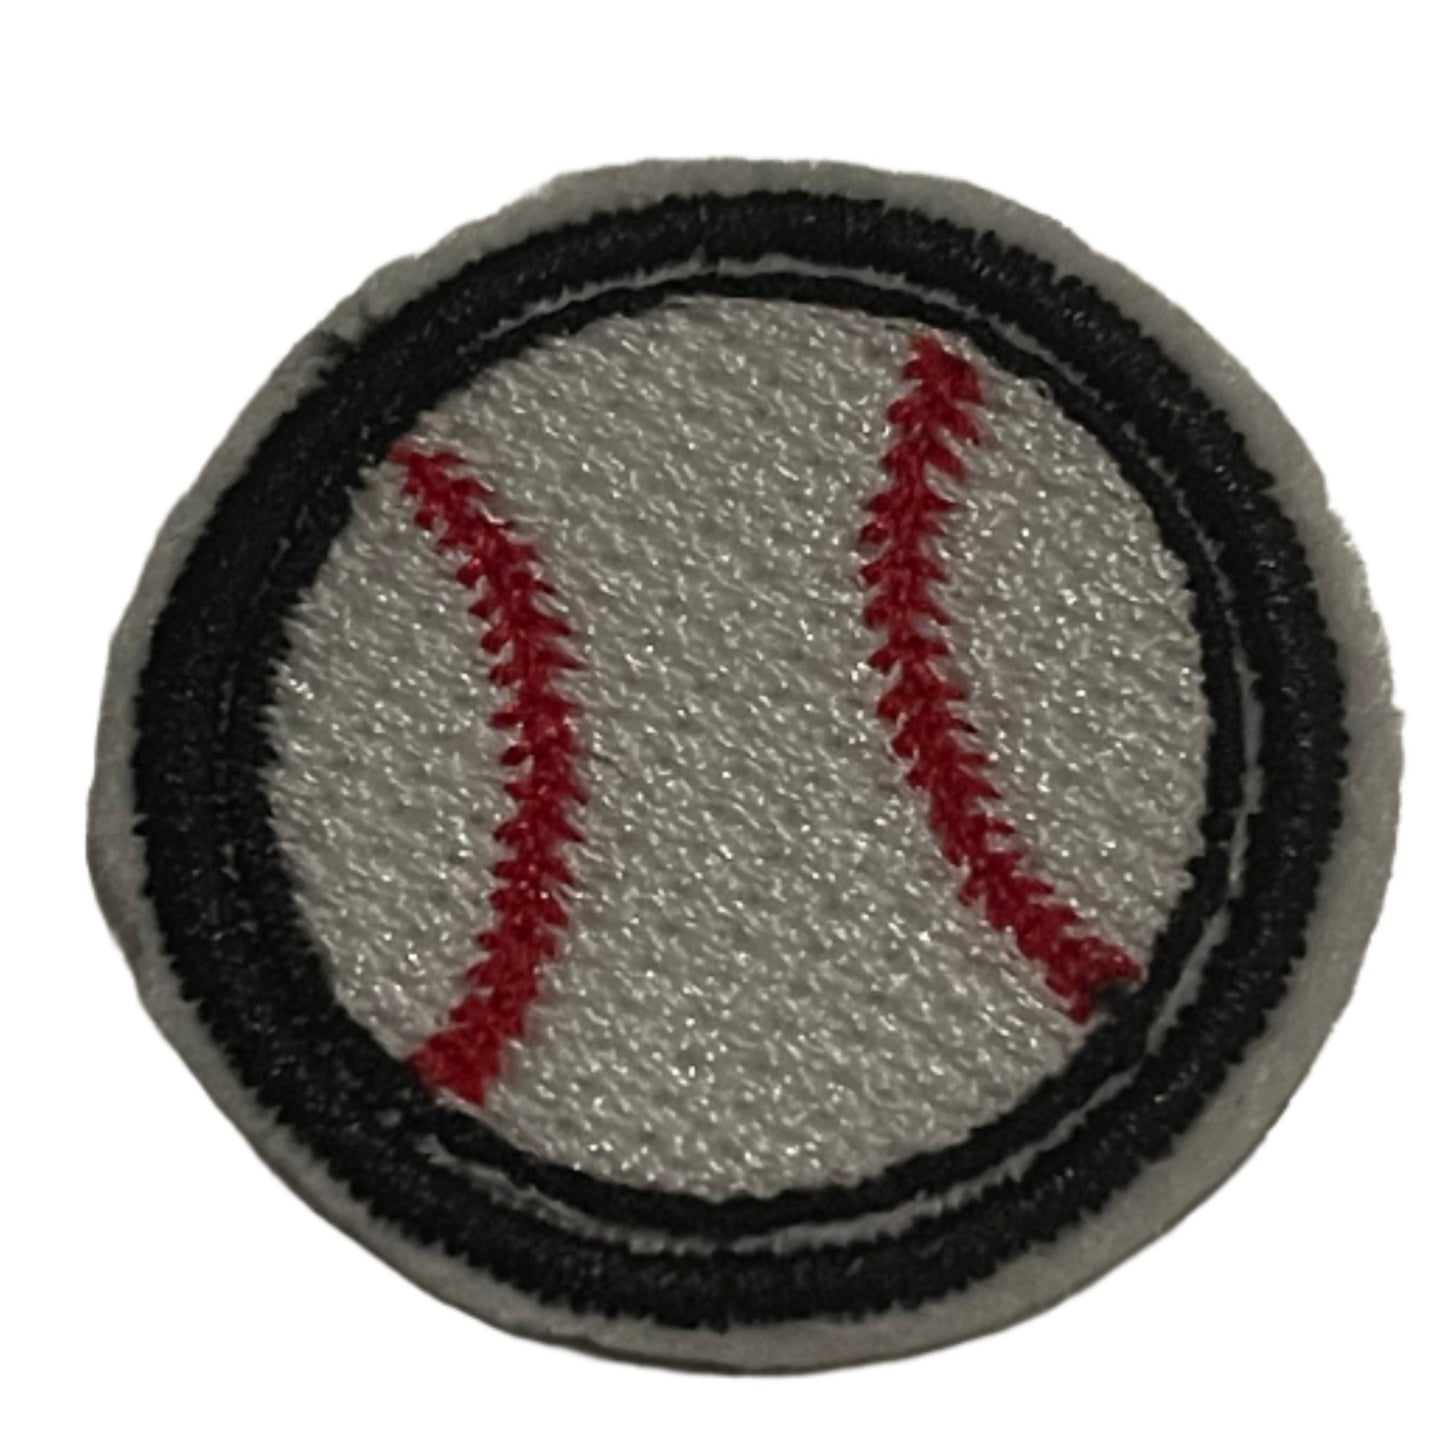 Close-up of a baseball embroidered patch with red stitching, perfect for customizing hats and other accessories.